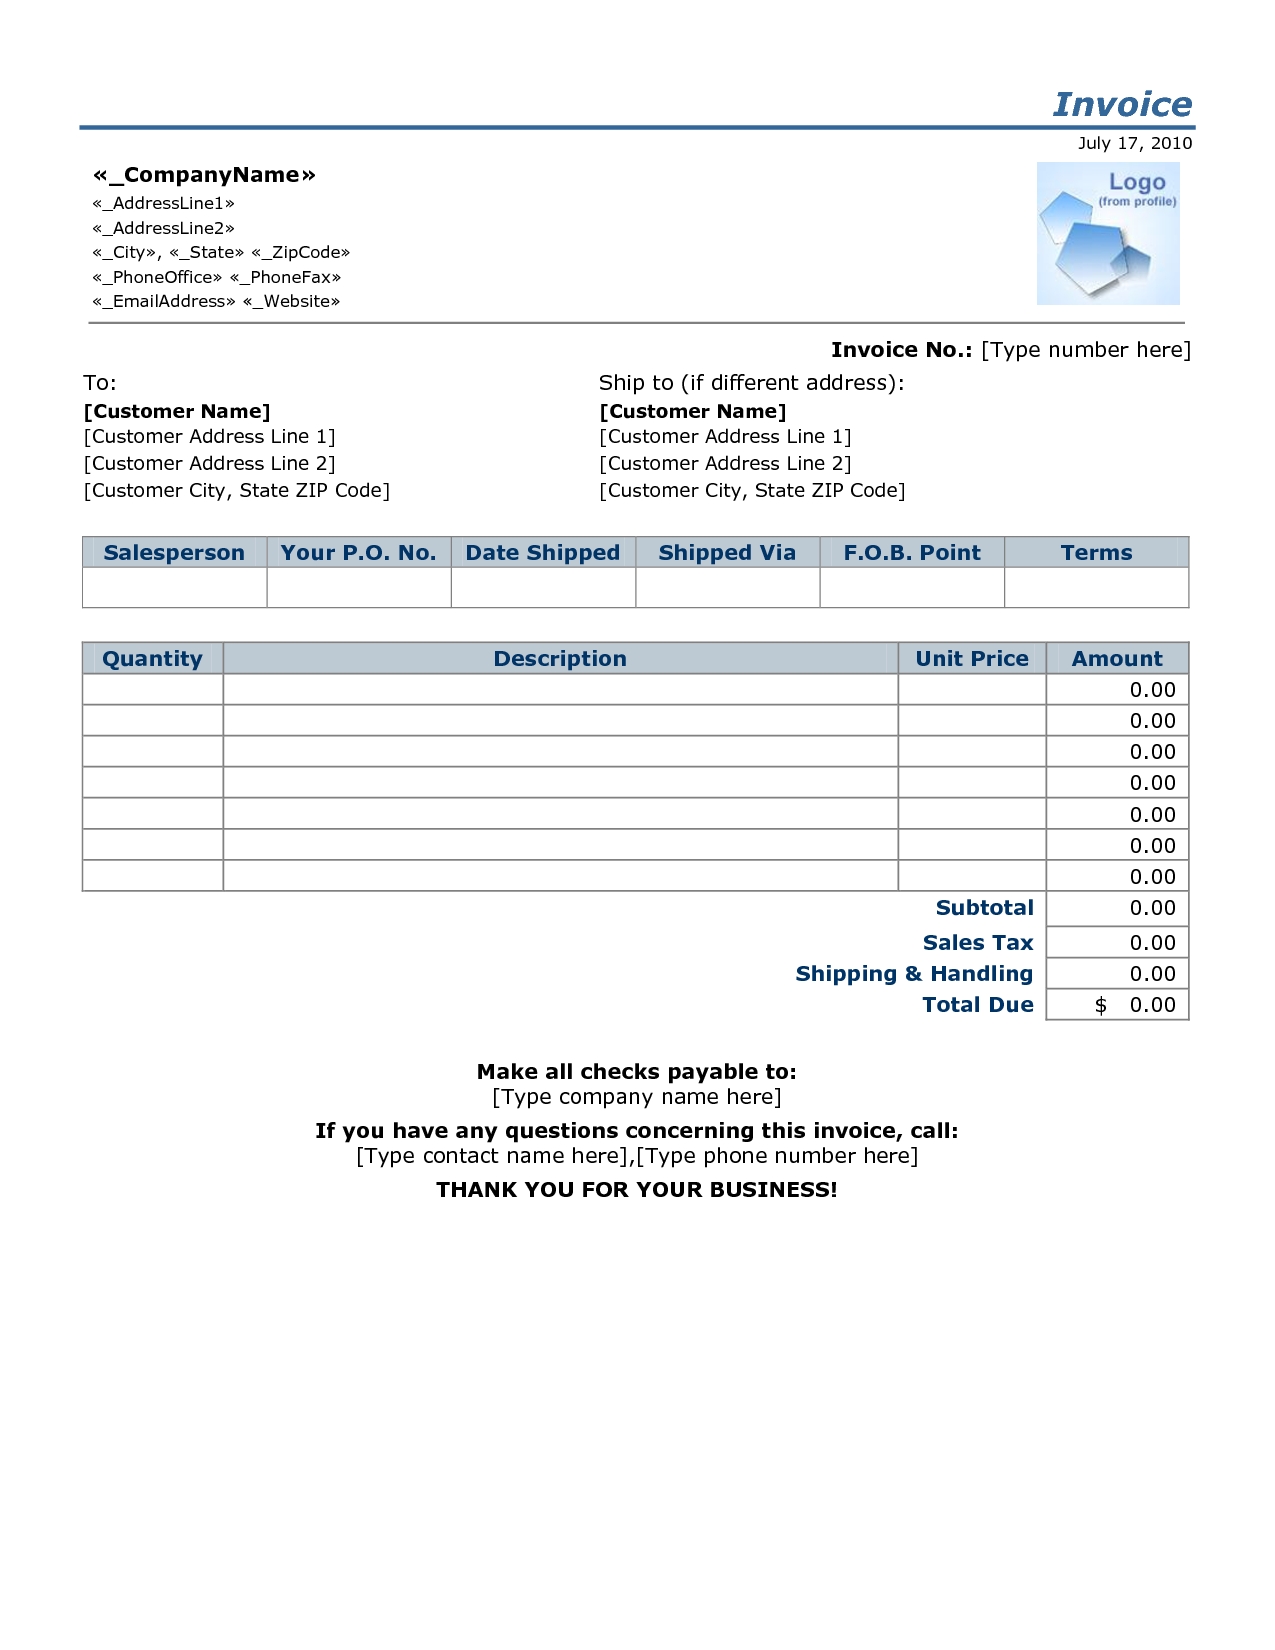 free small business invoice template newsupdate invoice for small business